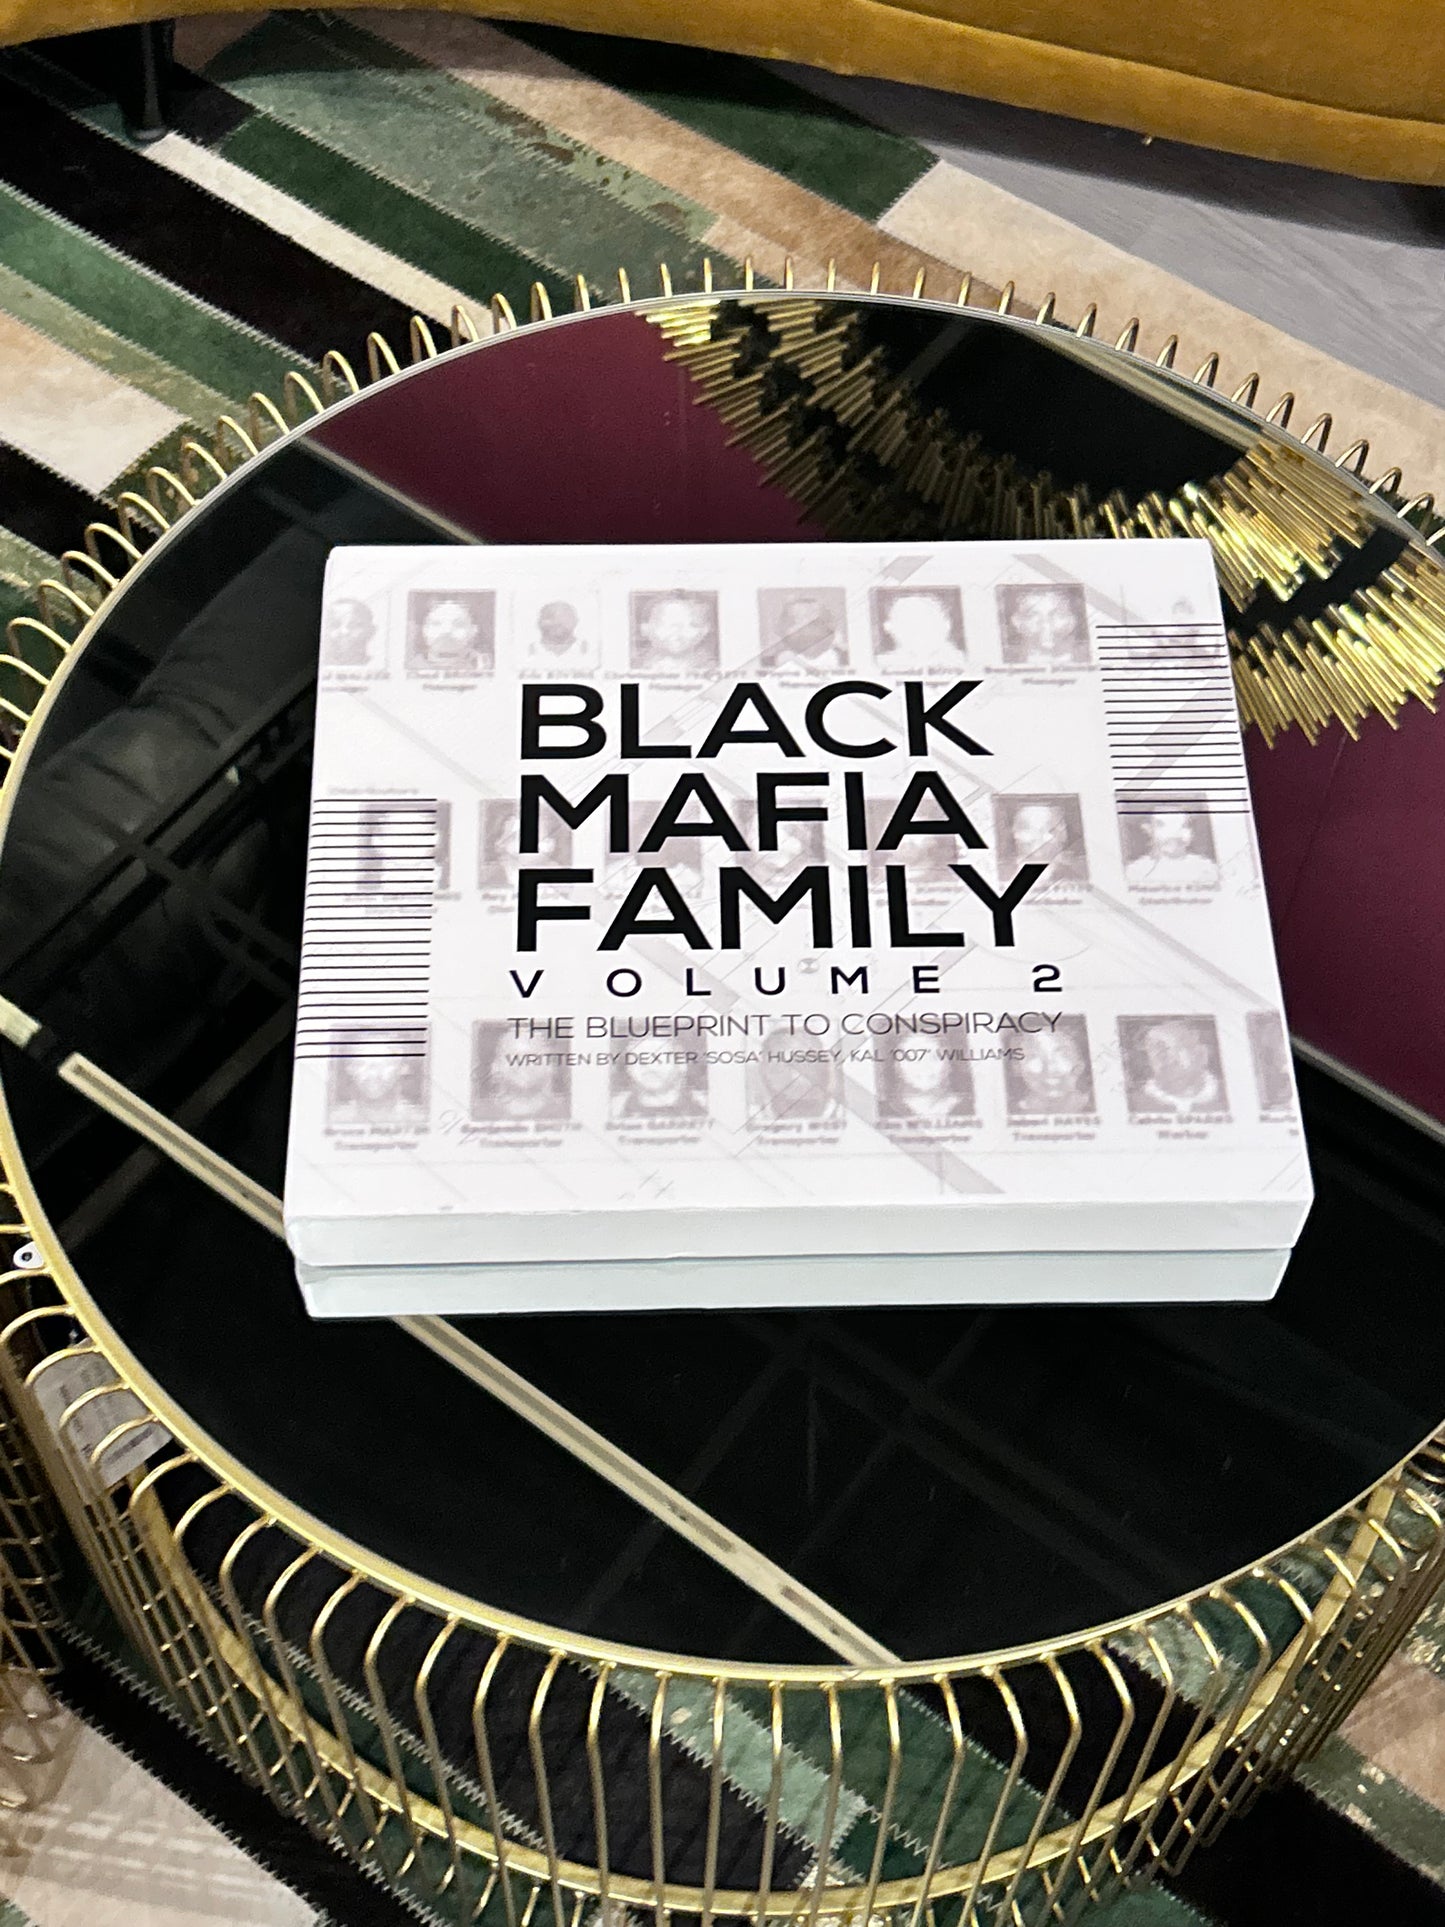 BMF BLACK MAFIA FAMILY "The Blueprint to Conspiracy" Volume 2 Collectors Edition